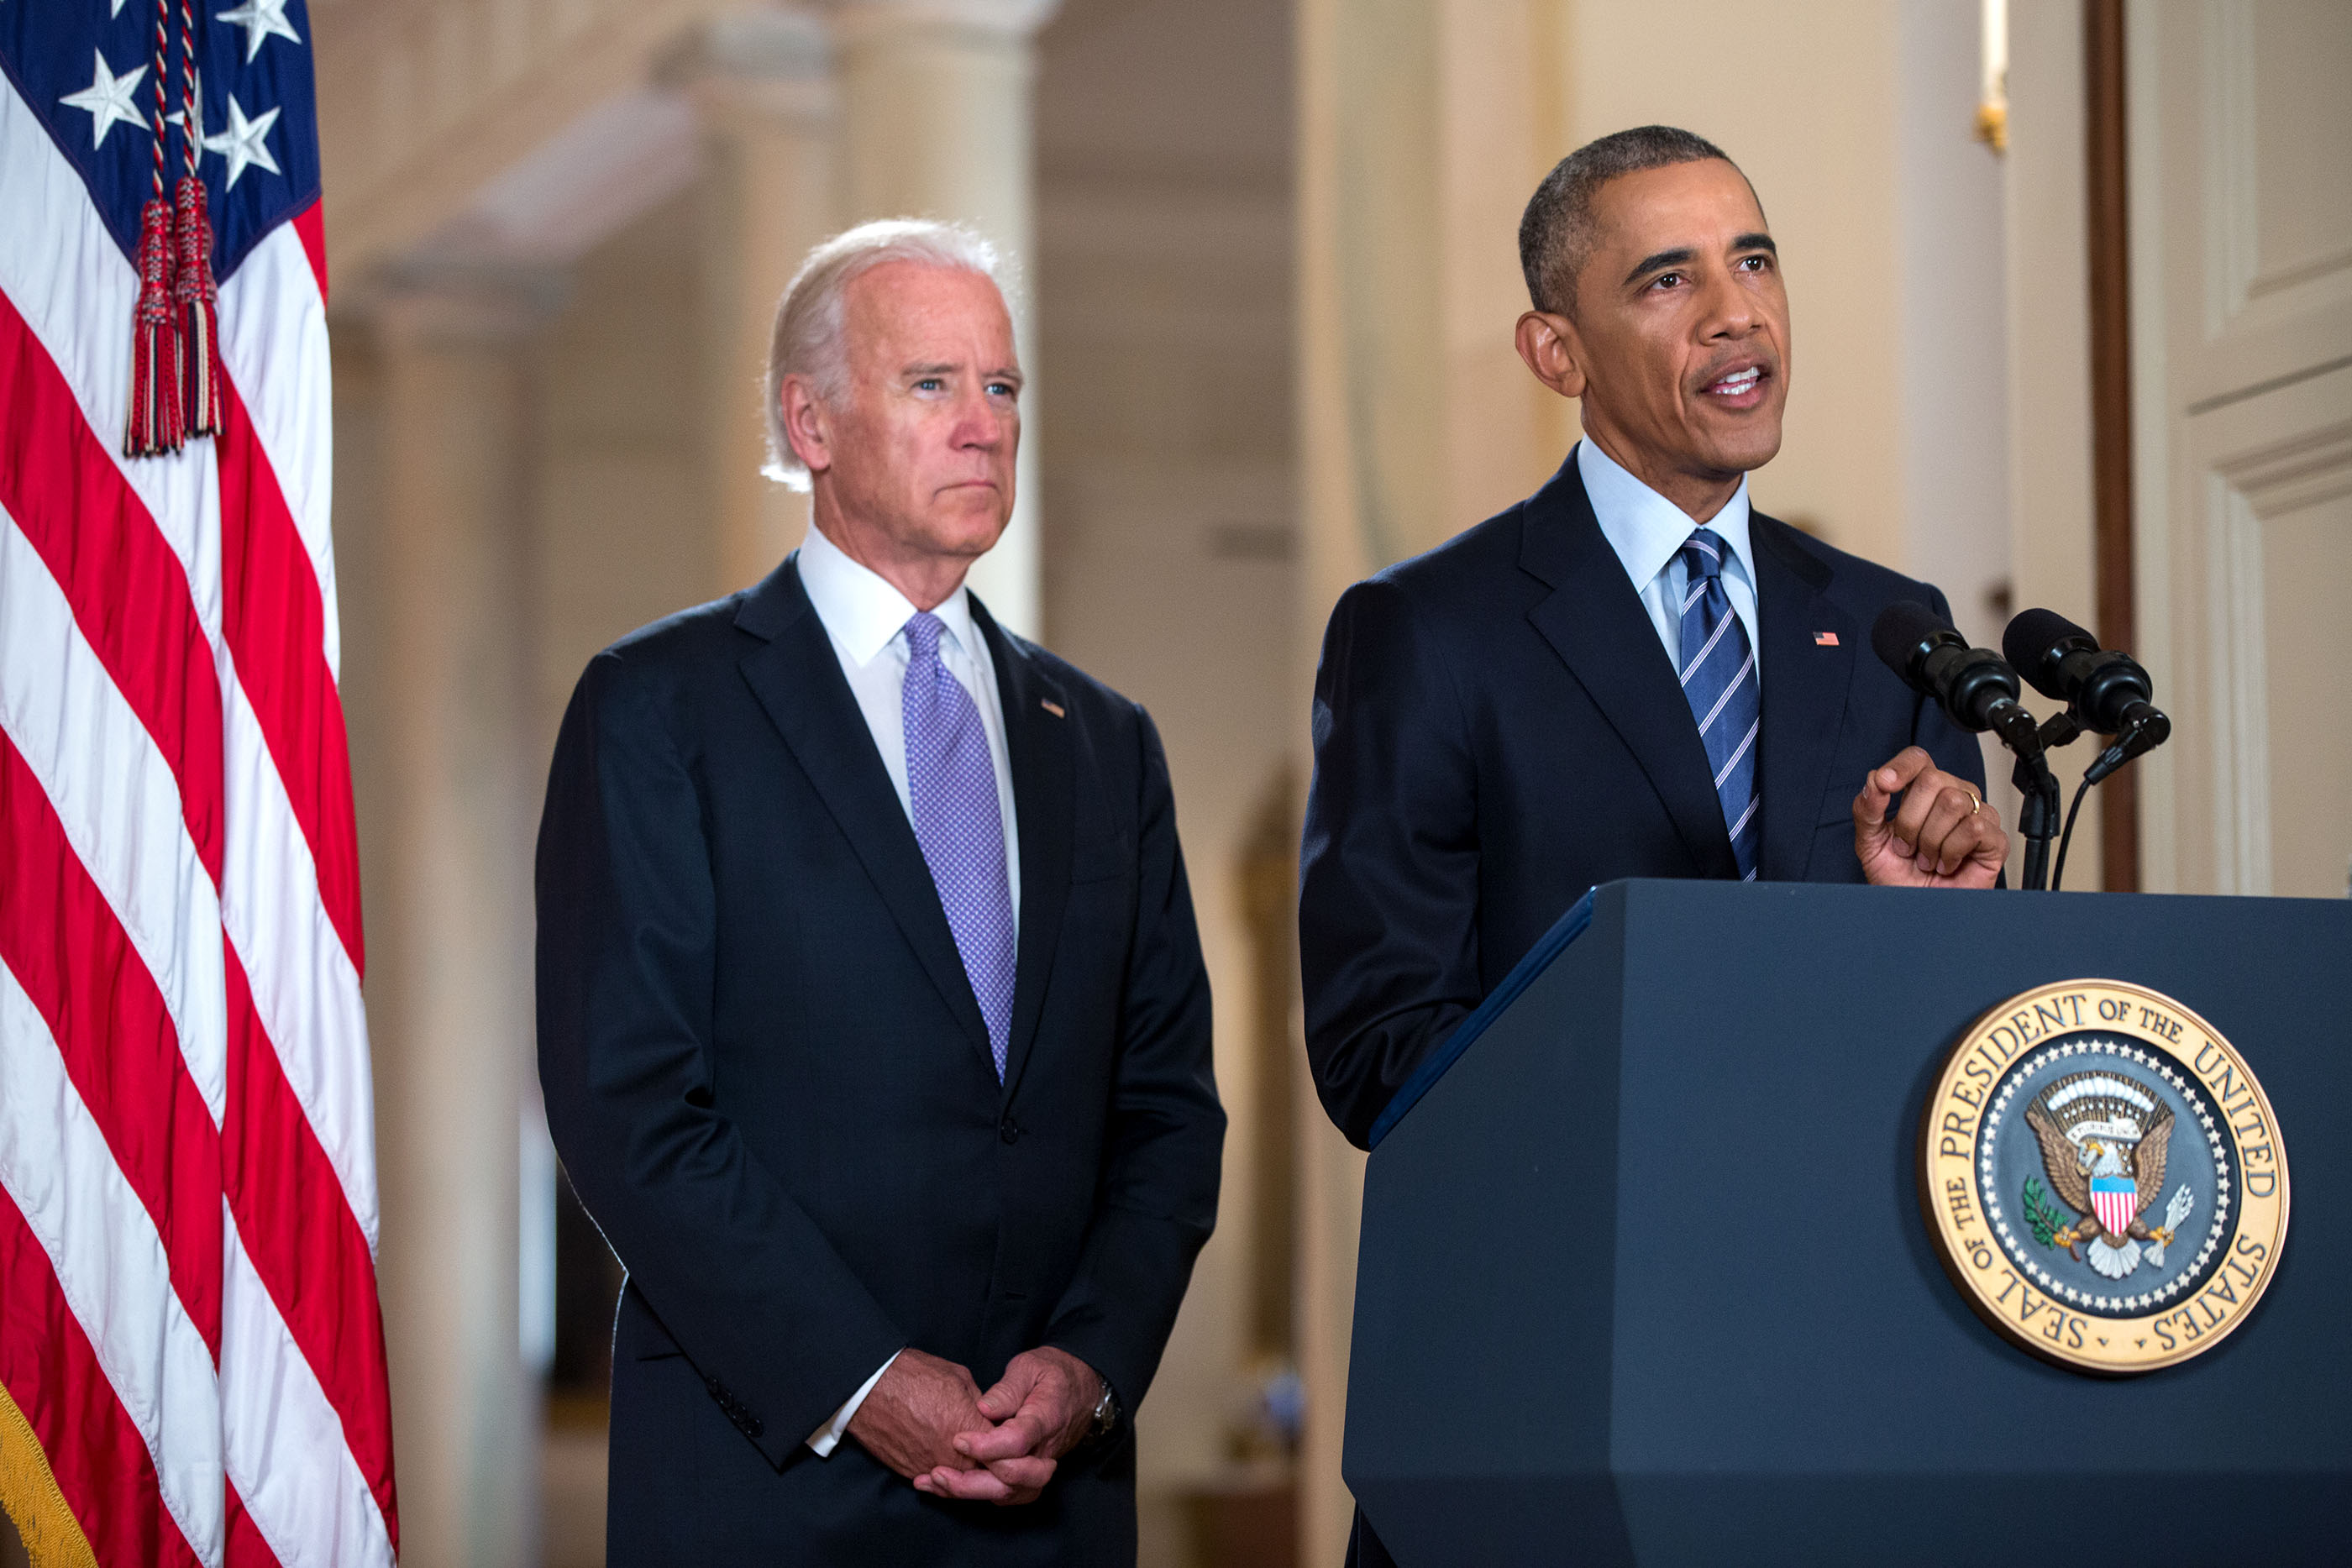 President Obama delivers a statement on the Iran nuclear agreement